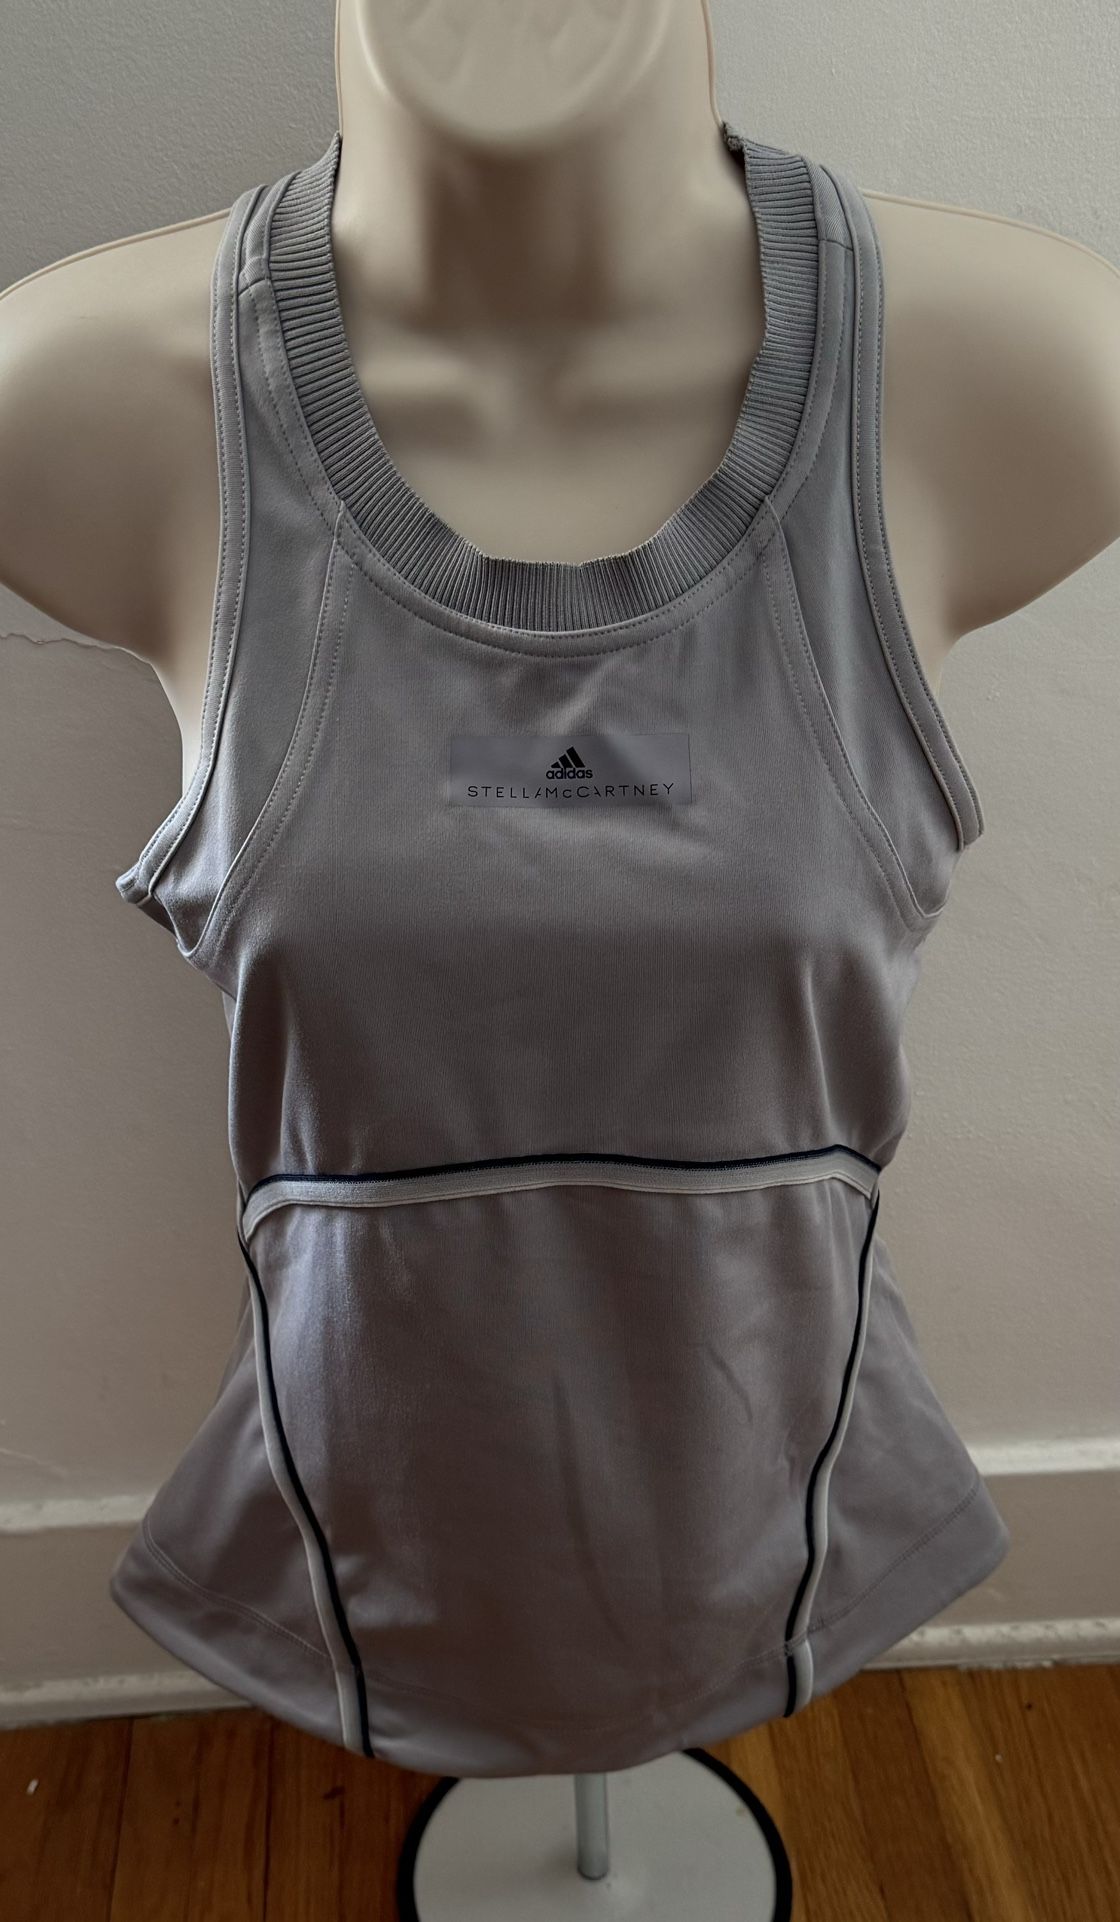 Adidas by Stella McCartney Climalite Gray Women’s Cut Out Back Raw Seaming Top, size S